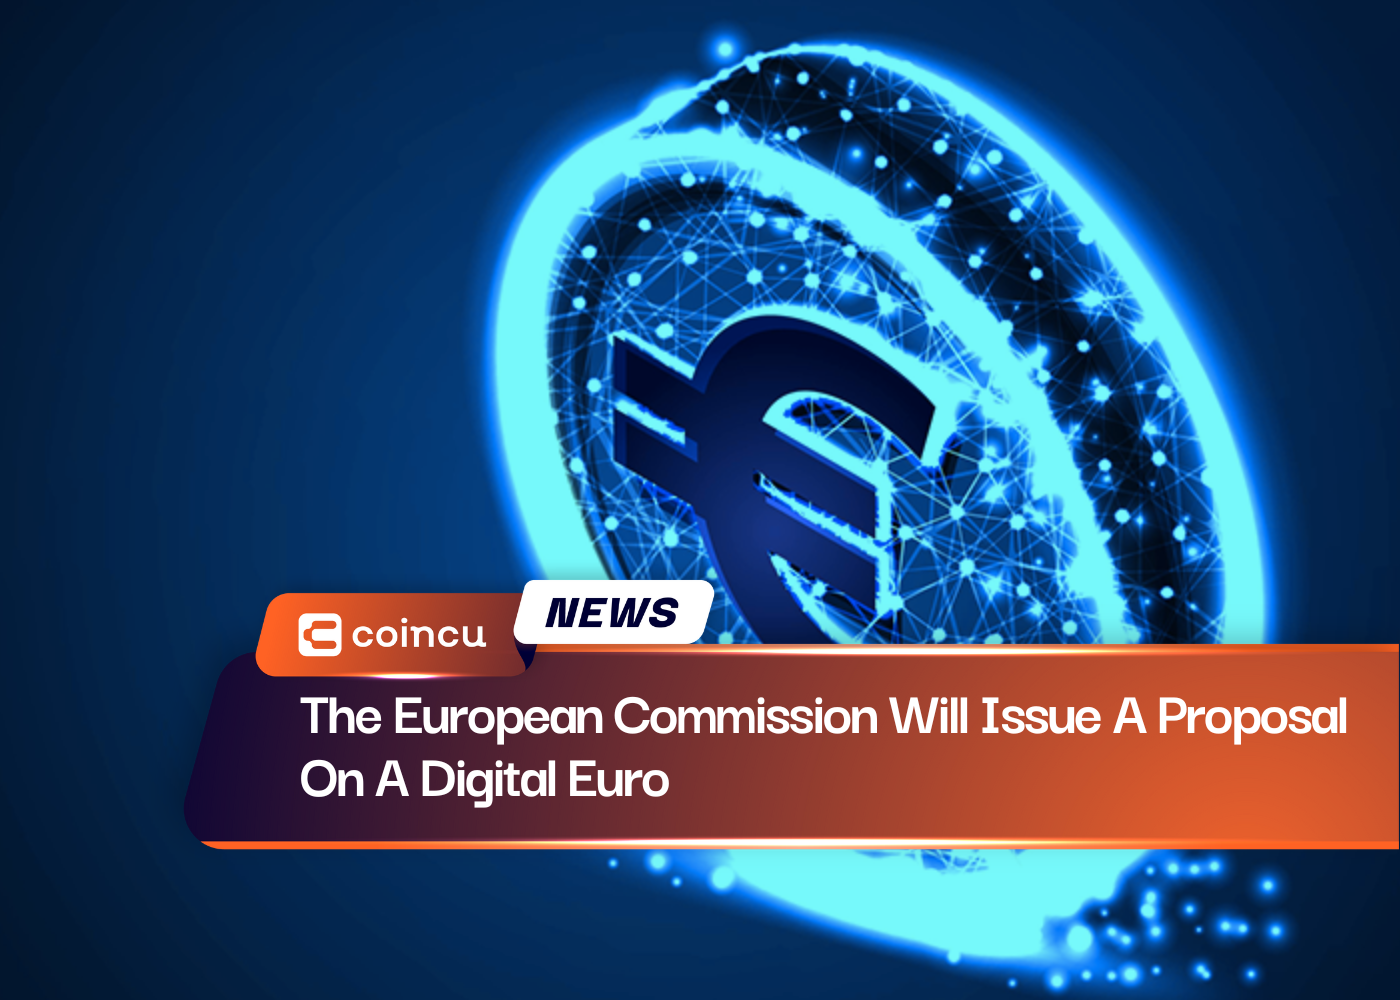 The European Commission Will Issue A Proposal On A Digital Euro